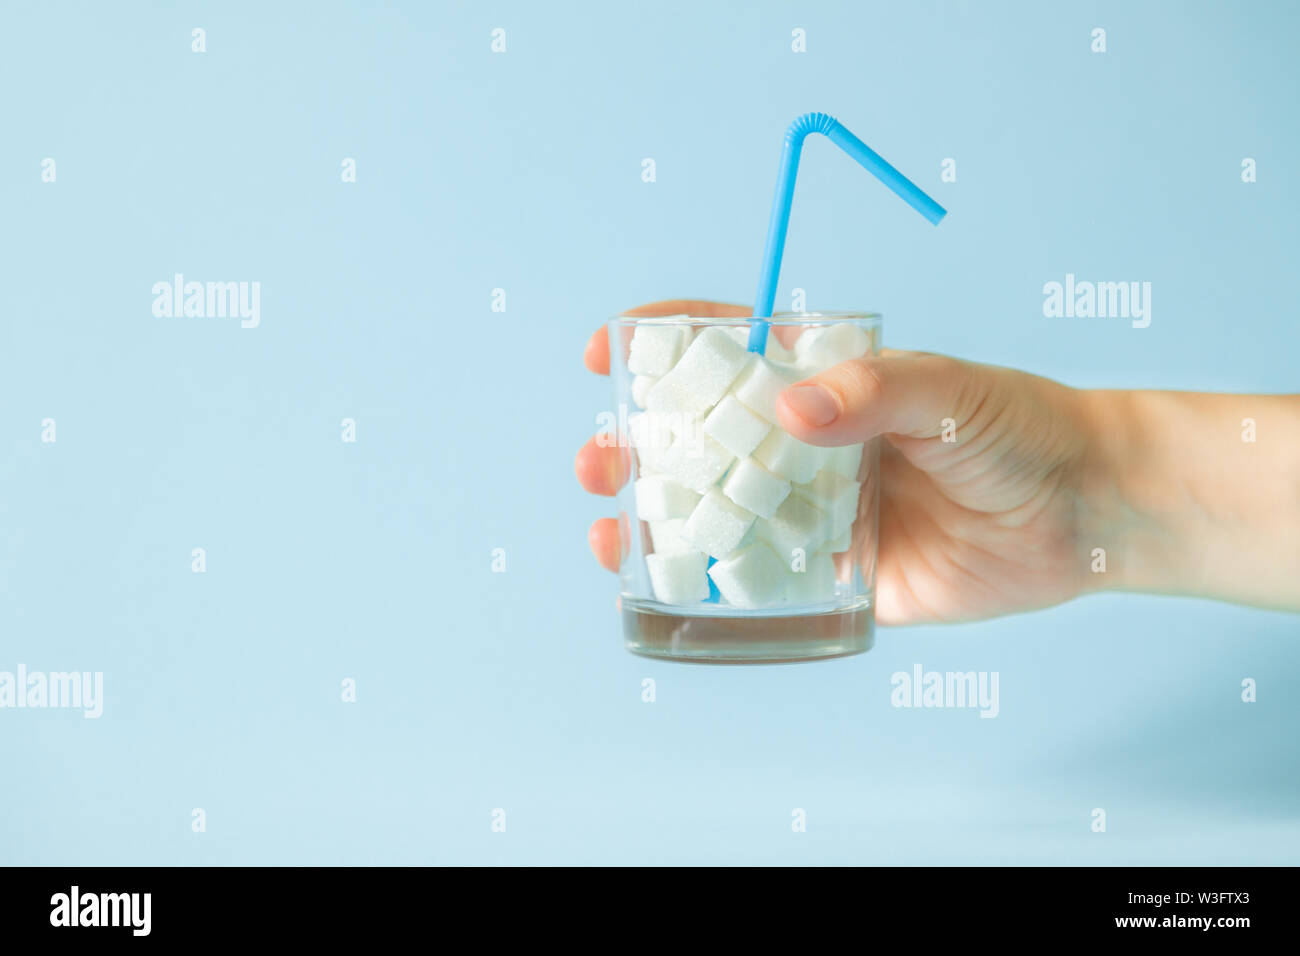 Excessive sugar consumption concept - hand holding glass with sugar cubes Stock Photo